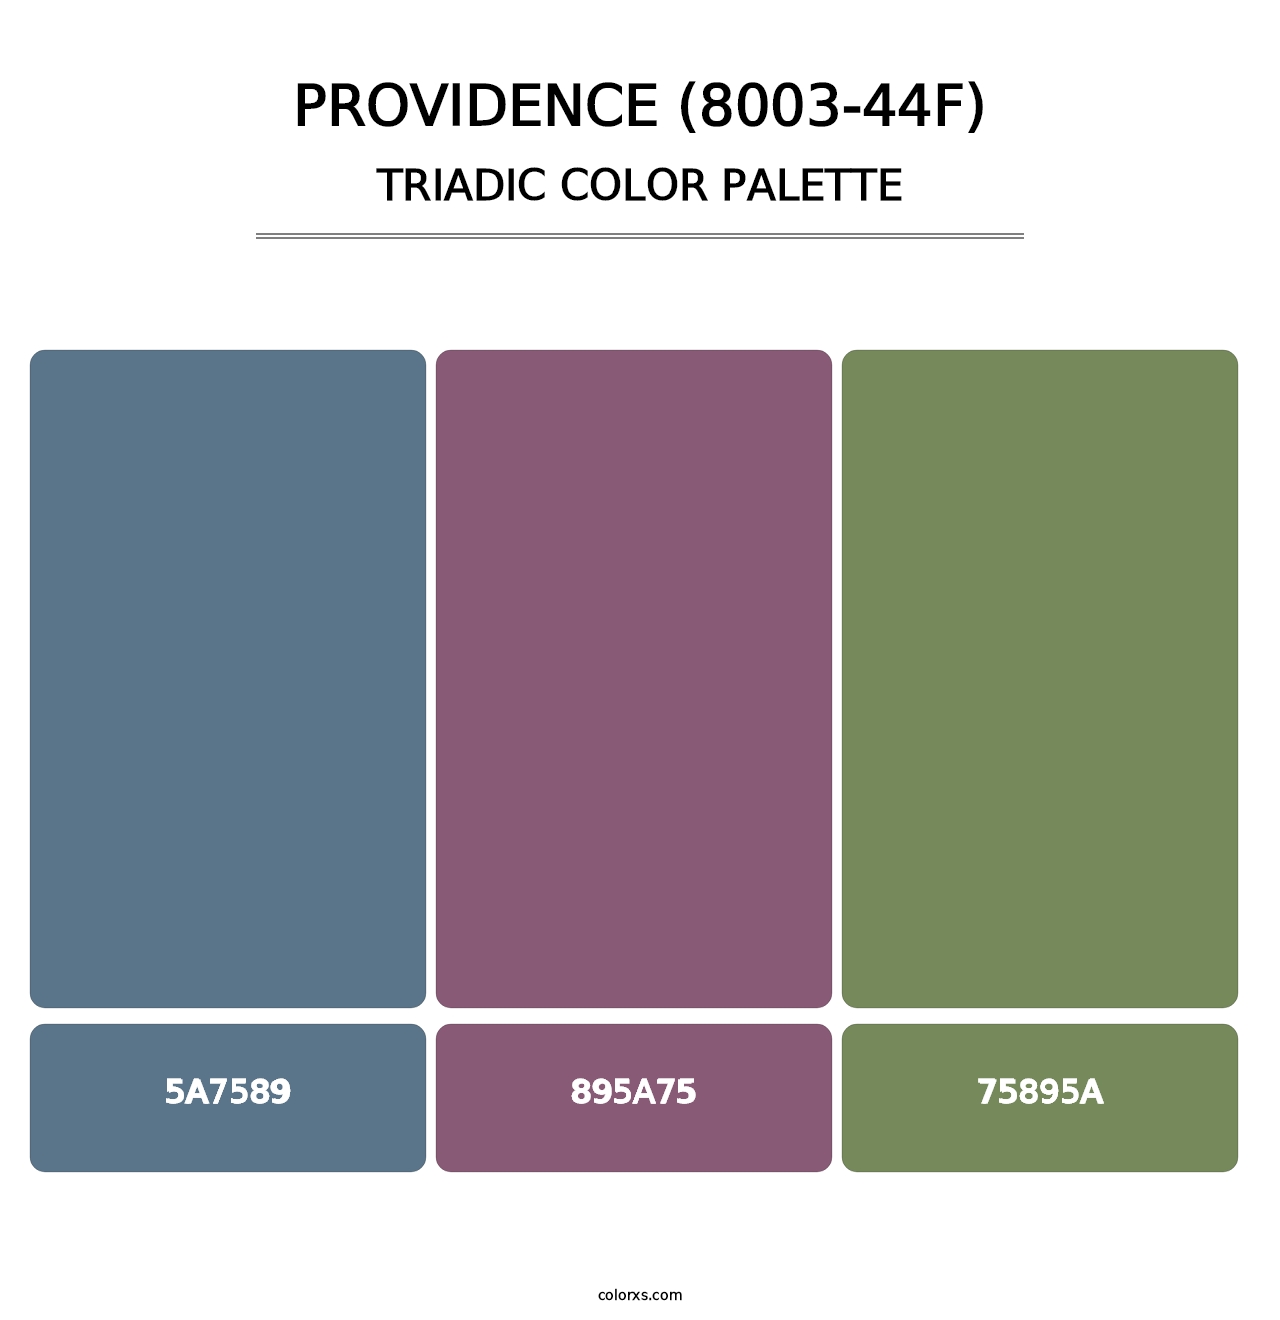 Providence (8003-44F) - Triadic Color Palette